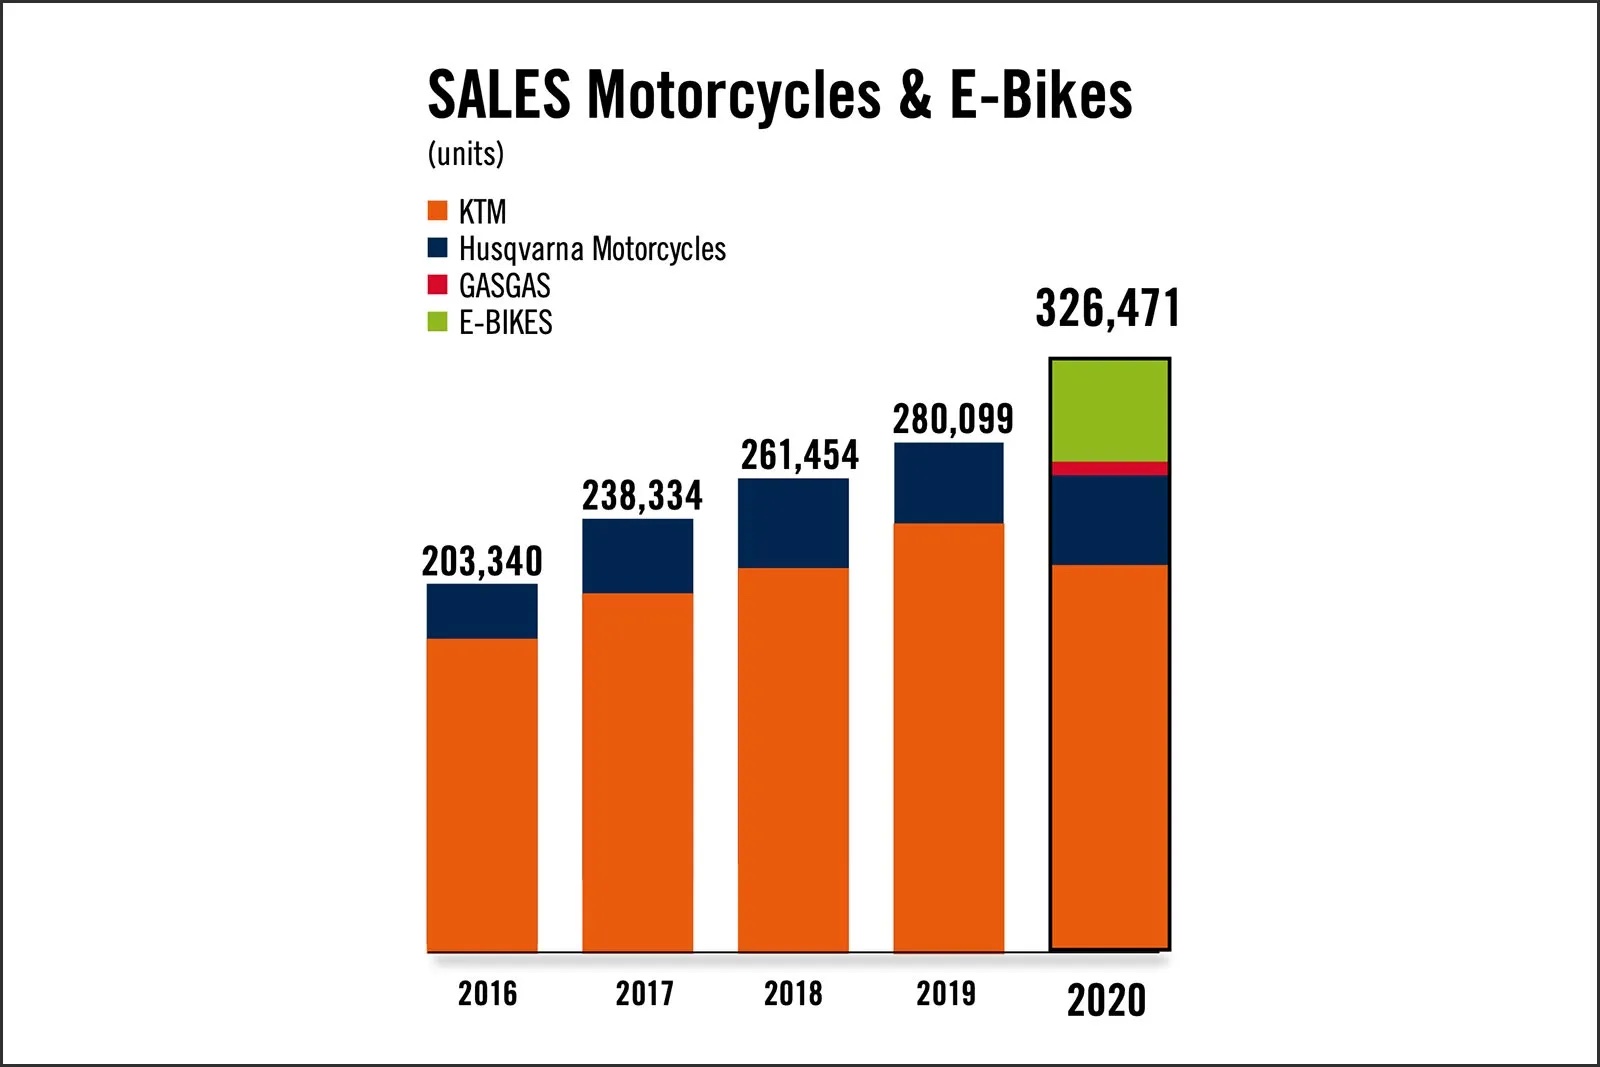 A view of the sales figures for Pierer Mobility, with KTM dominating the columns